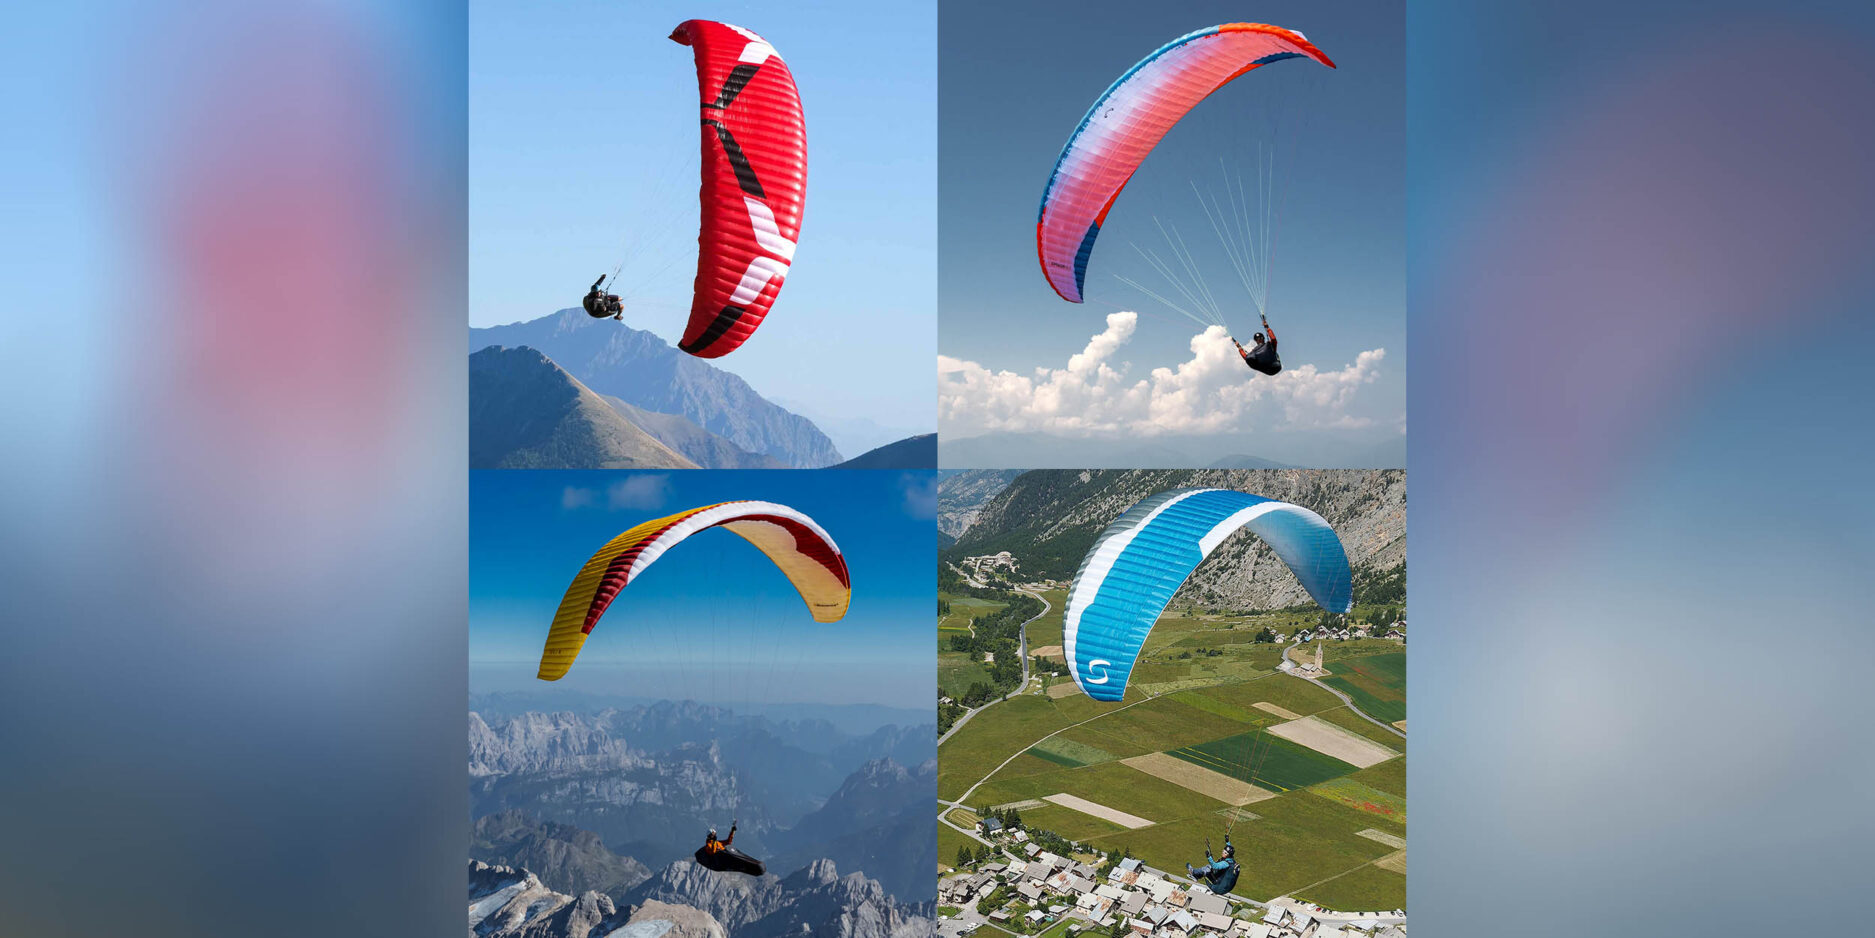 Win a paraglider from Advance, Gin, Ozone or Supair